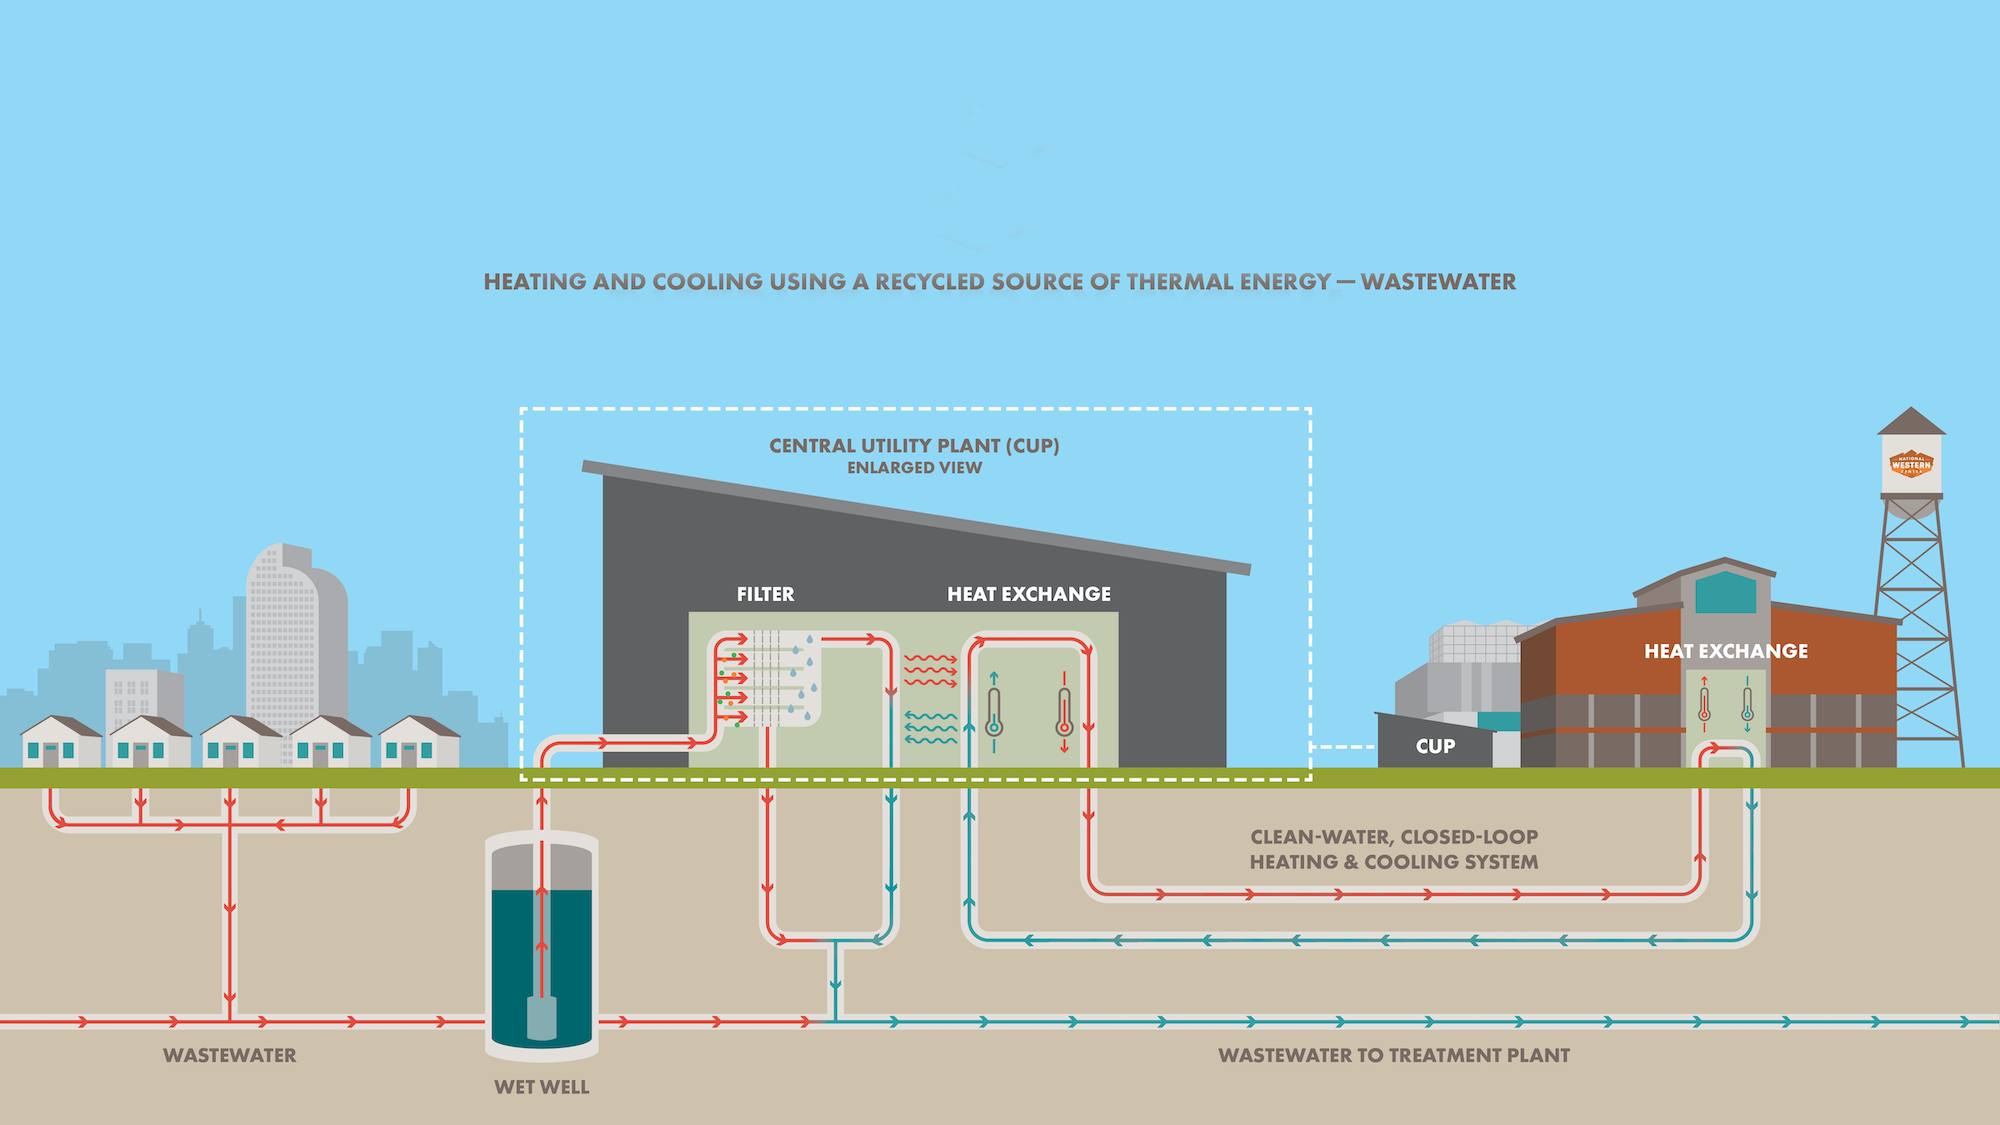 Illustrated diagram of the district energy system with red and blue arrows to represent the recycling of thermal energy.